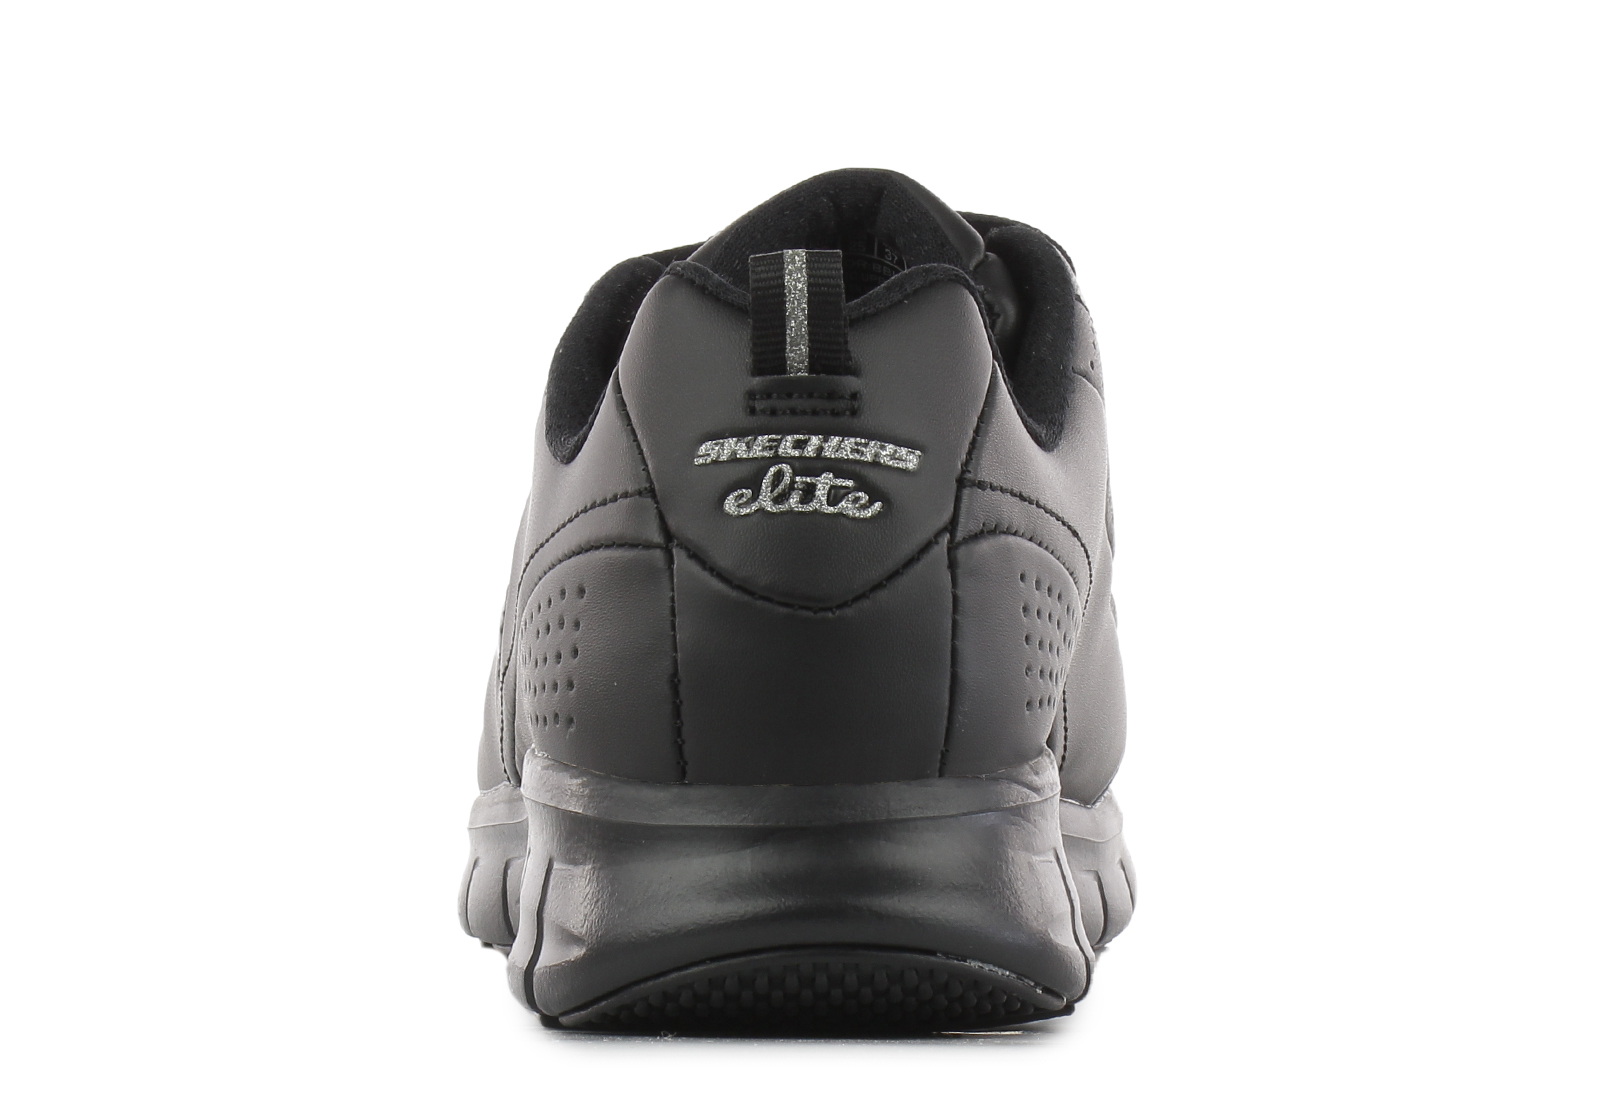 Skechers Sneakers Status 11798-BBK - Online shop for sneakers, shoes and boots